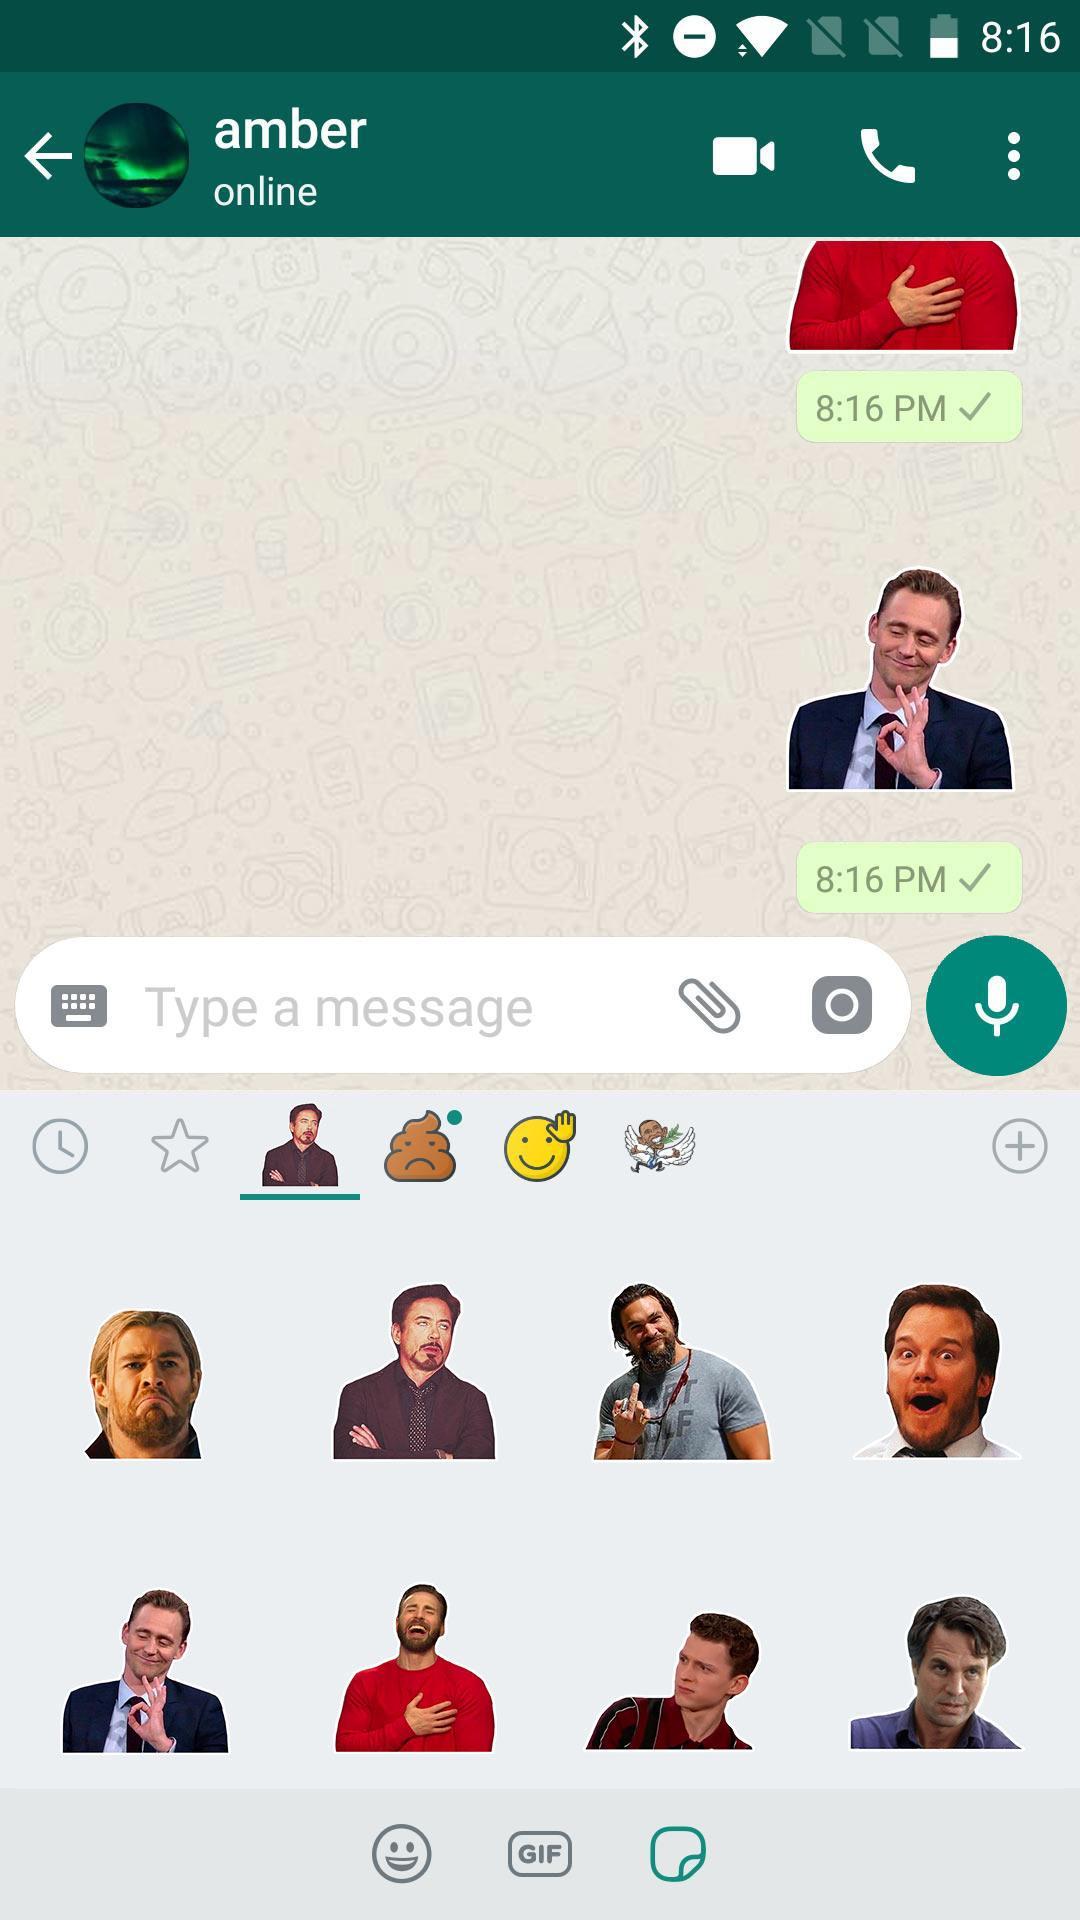 Funny Meme Stickers For Whatsapp